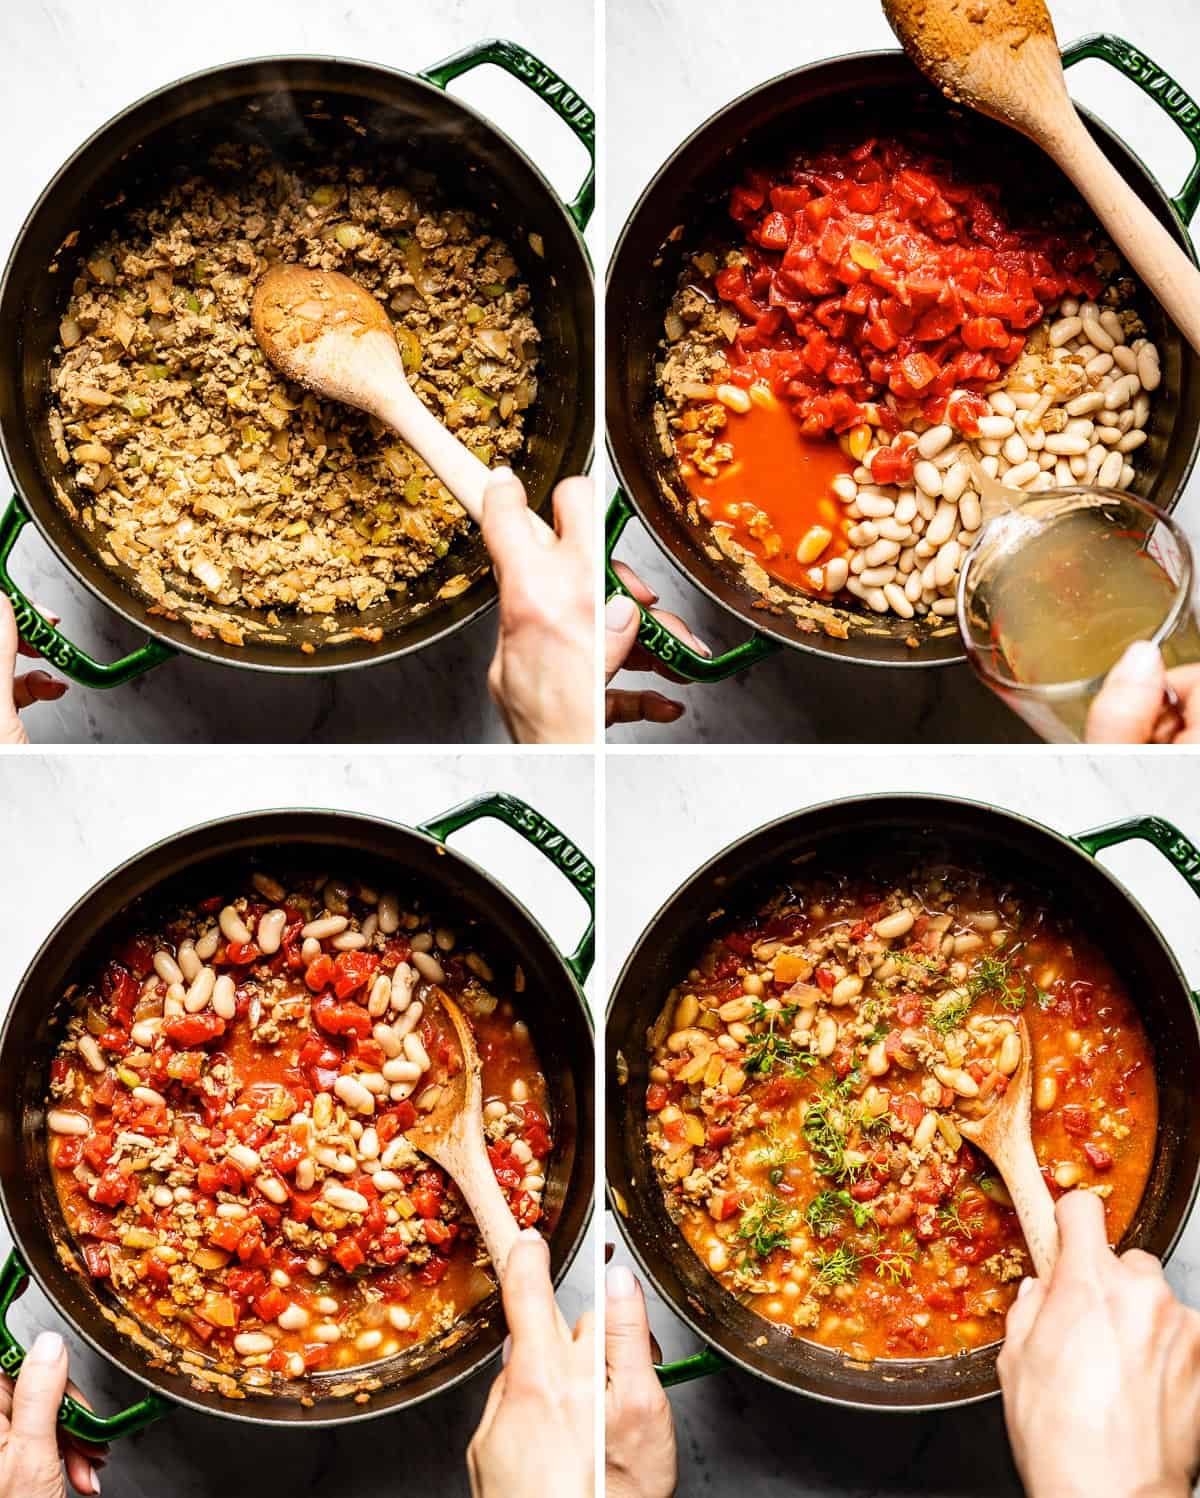 A collage of images showing how to make buffalo chicken chili on stove top.